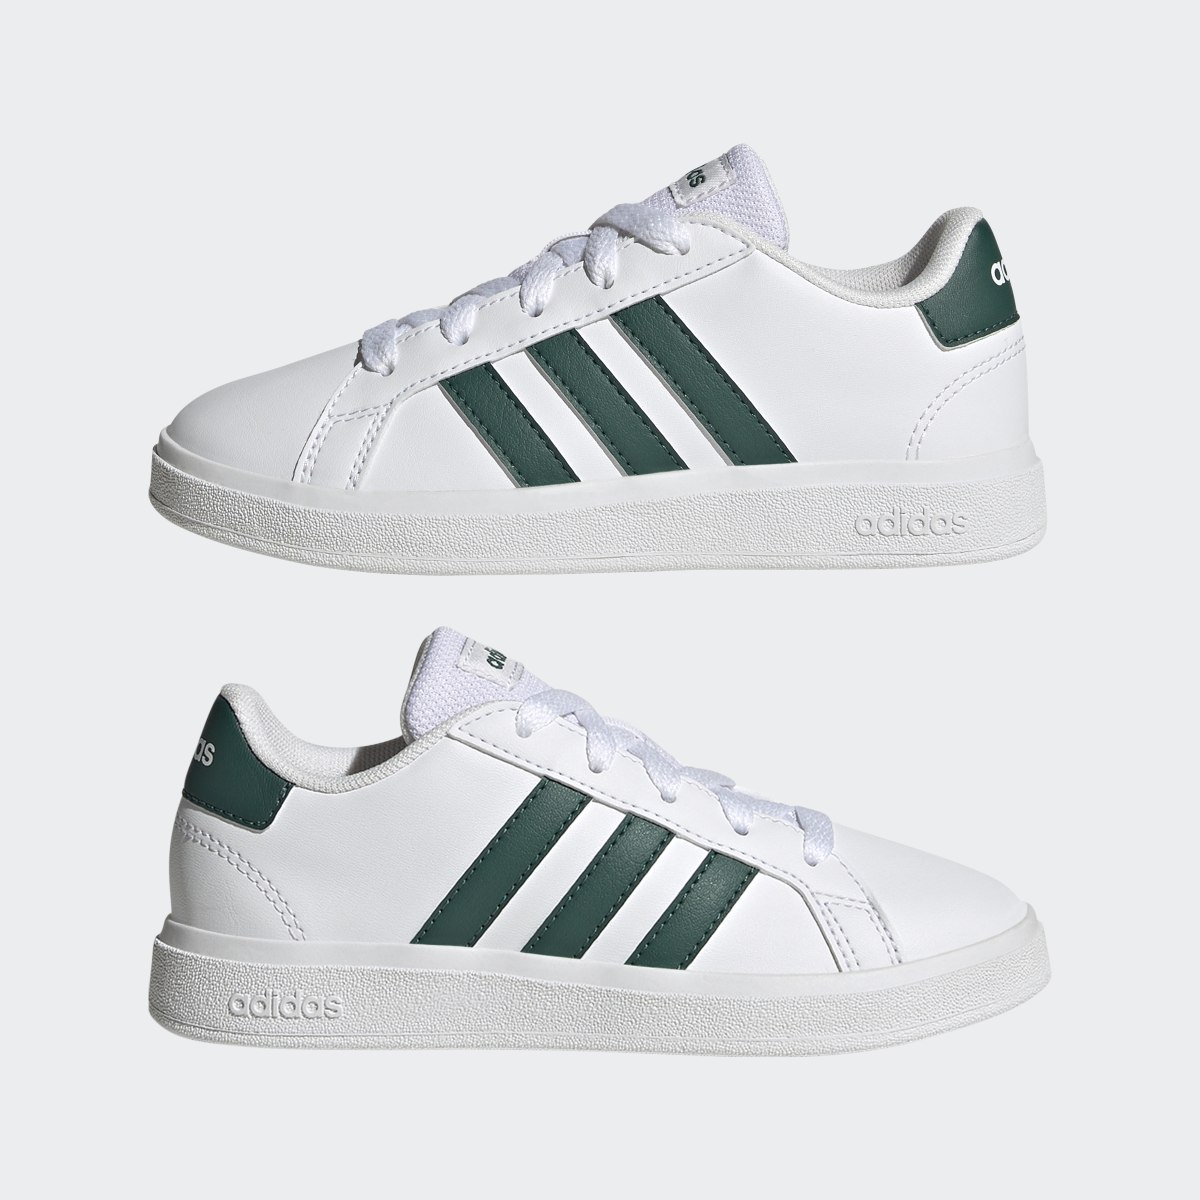 Adidas Grand Court Lifestyle Tennis Lace-Up Shoes. 8